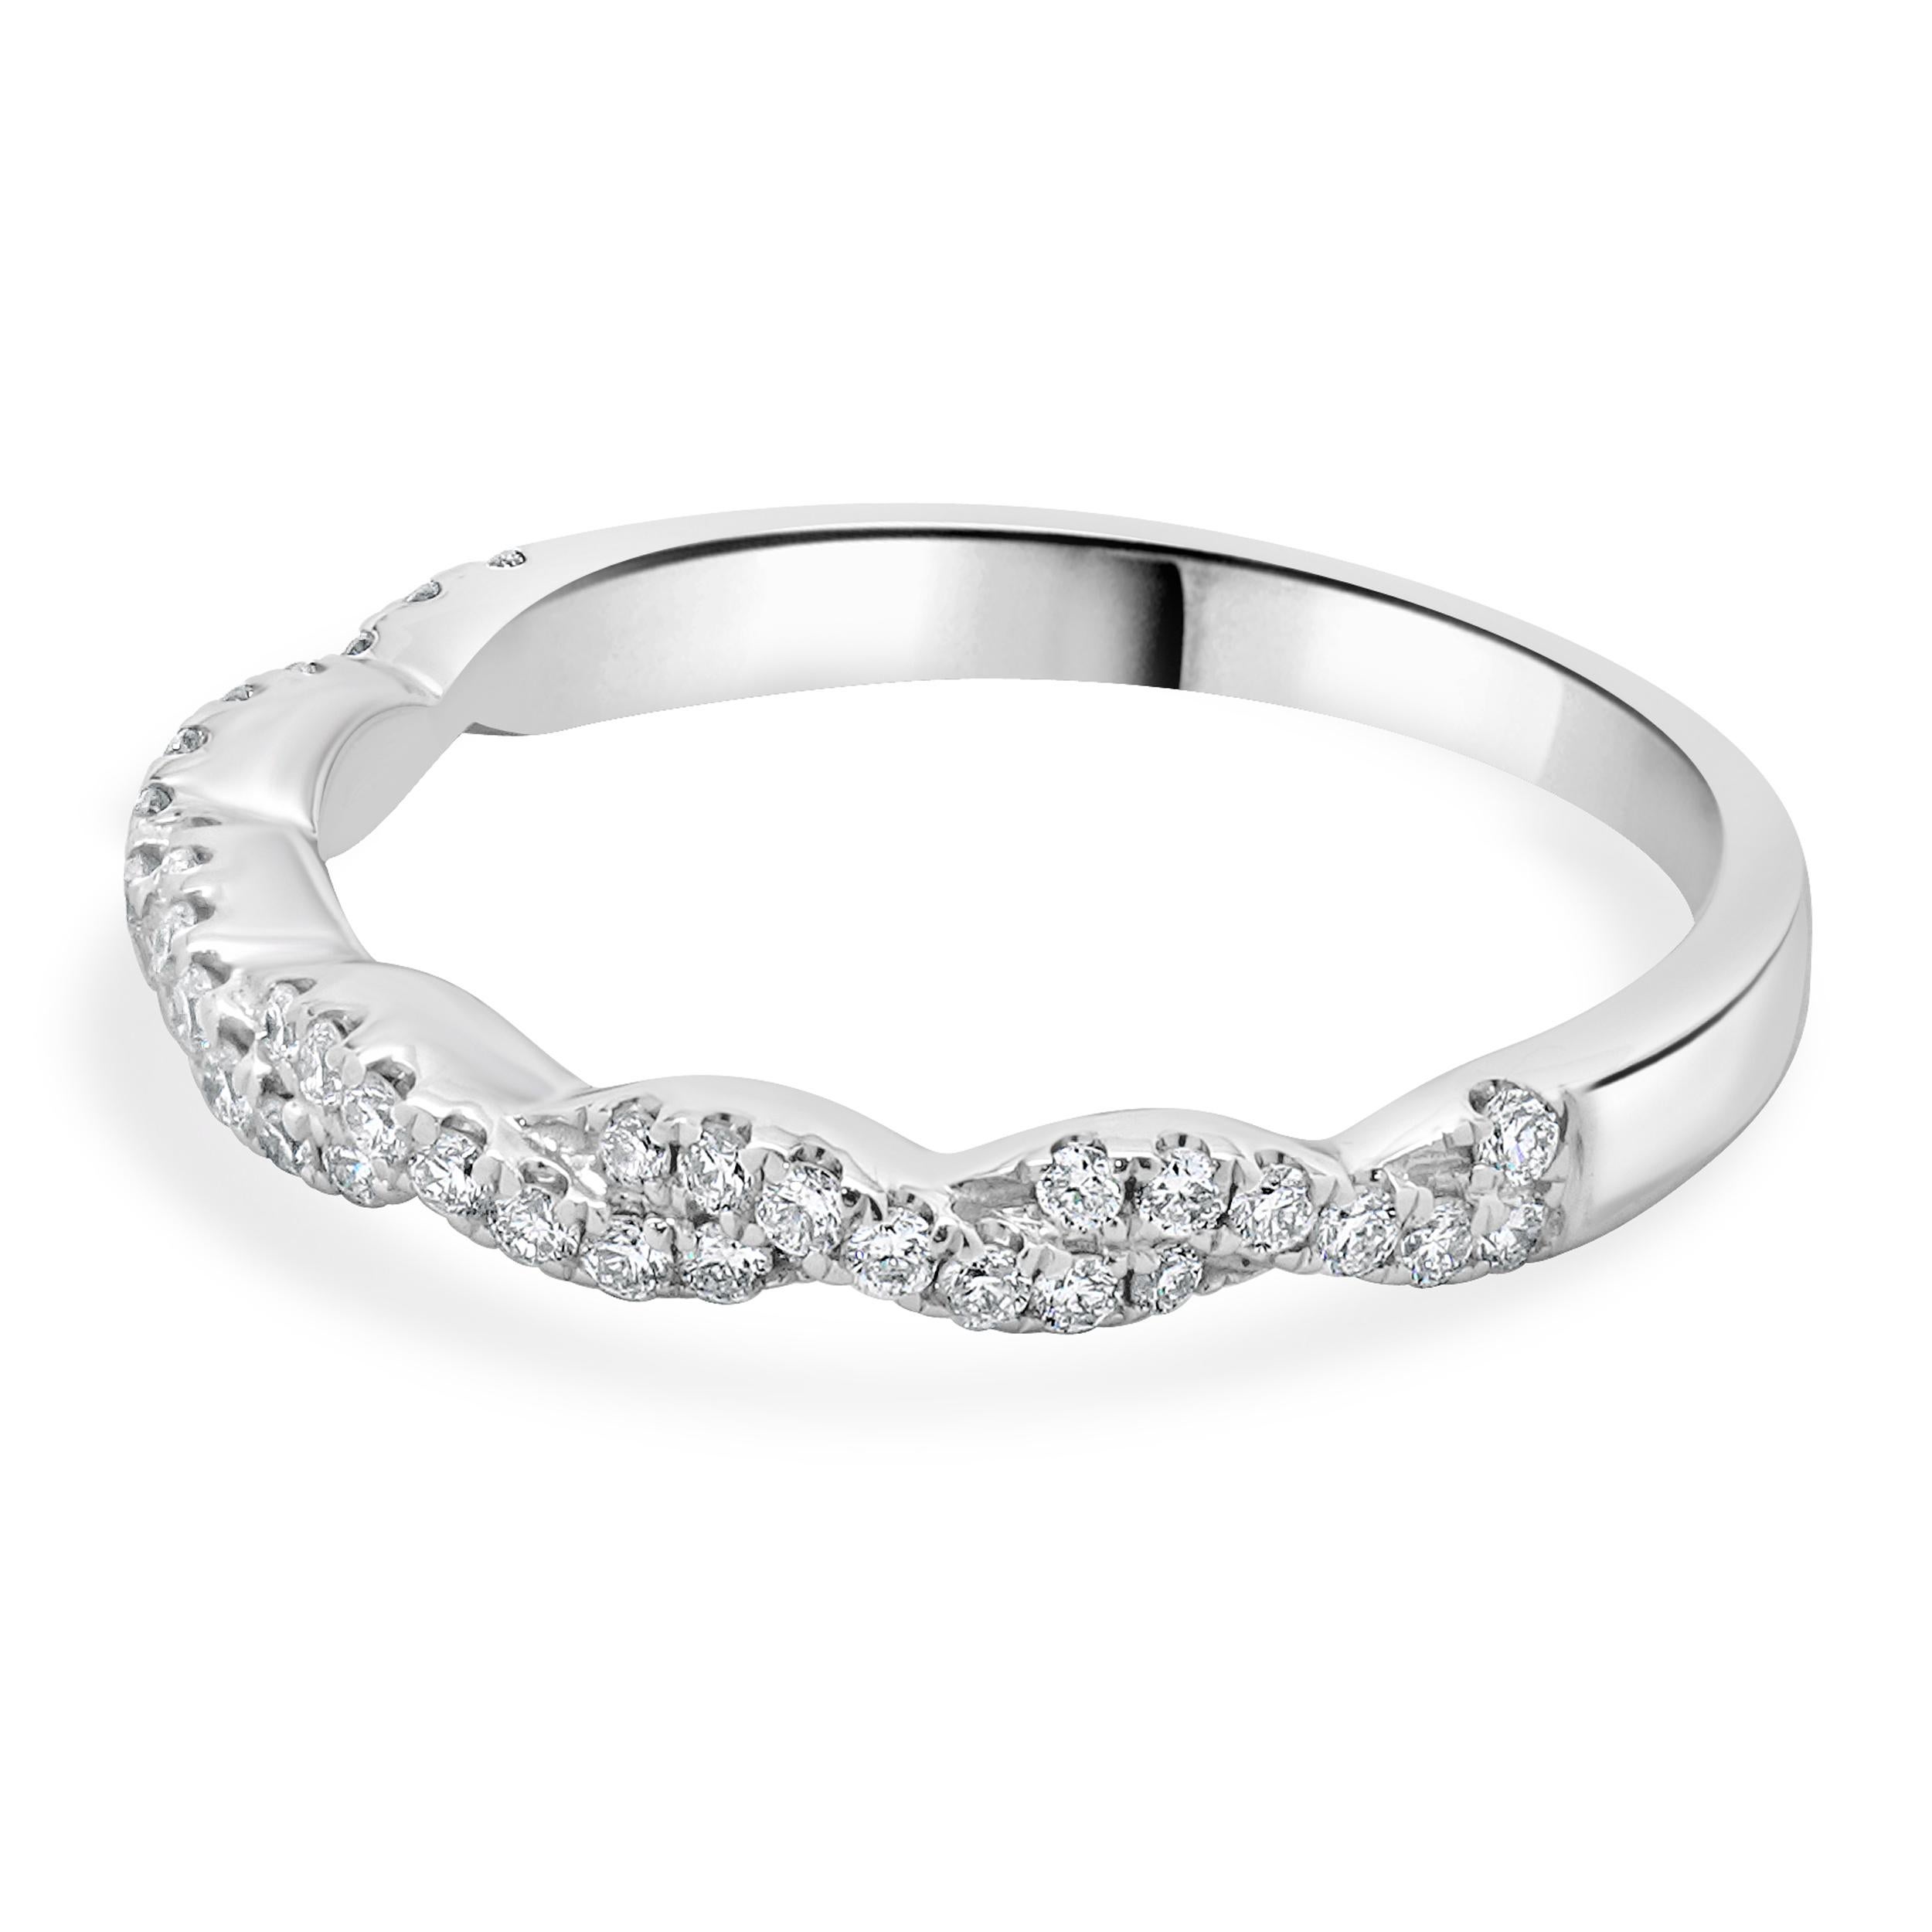 Designer: custom
Material: 14K white gold
Diamond: 21 round brilliant cut = 0.21cttw
Color: H
Clarity: SI2
Ring size: 6.5 (please allow two additional shipping days for sizing requests)
Weight: 2.01 grams
